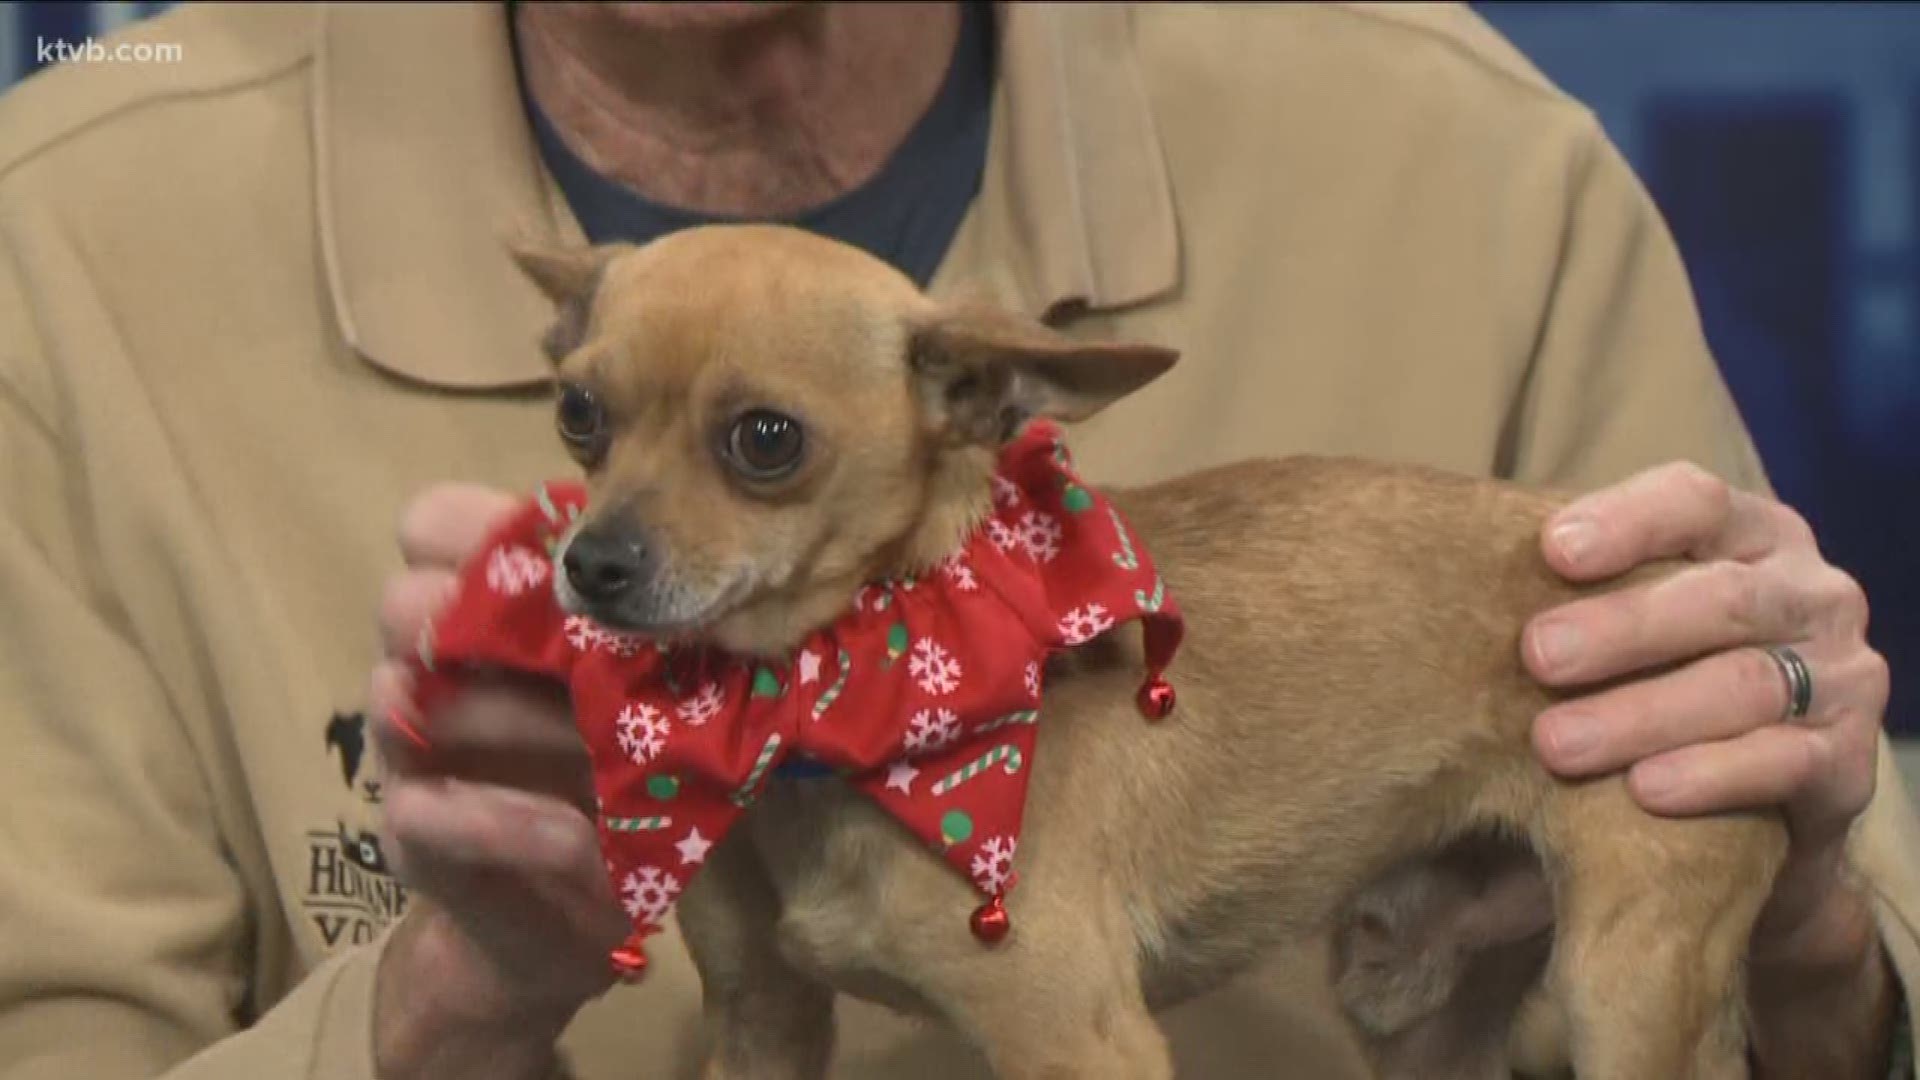 Mickey is available now for adoption at the Idaho Humane Society. He does have a companion dog at the shelter.